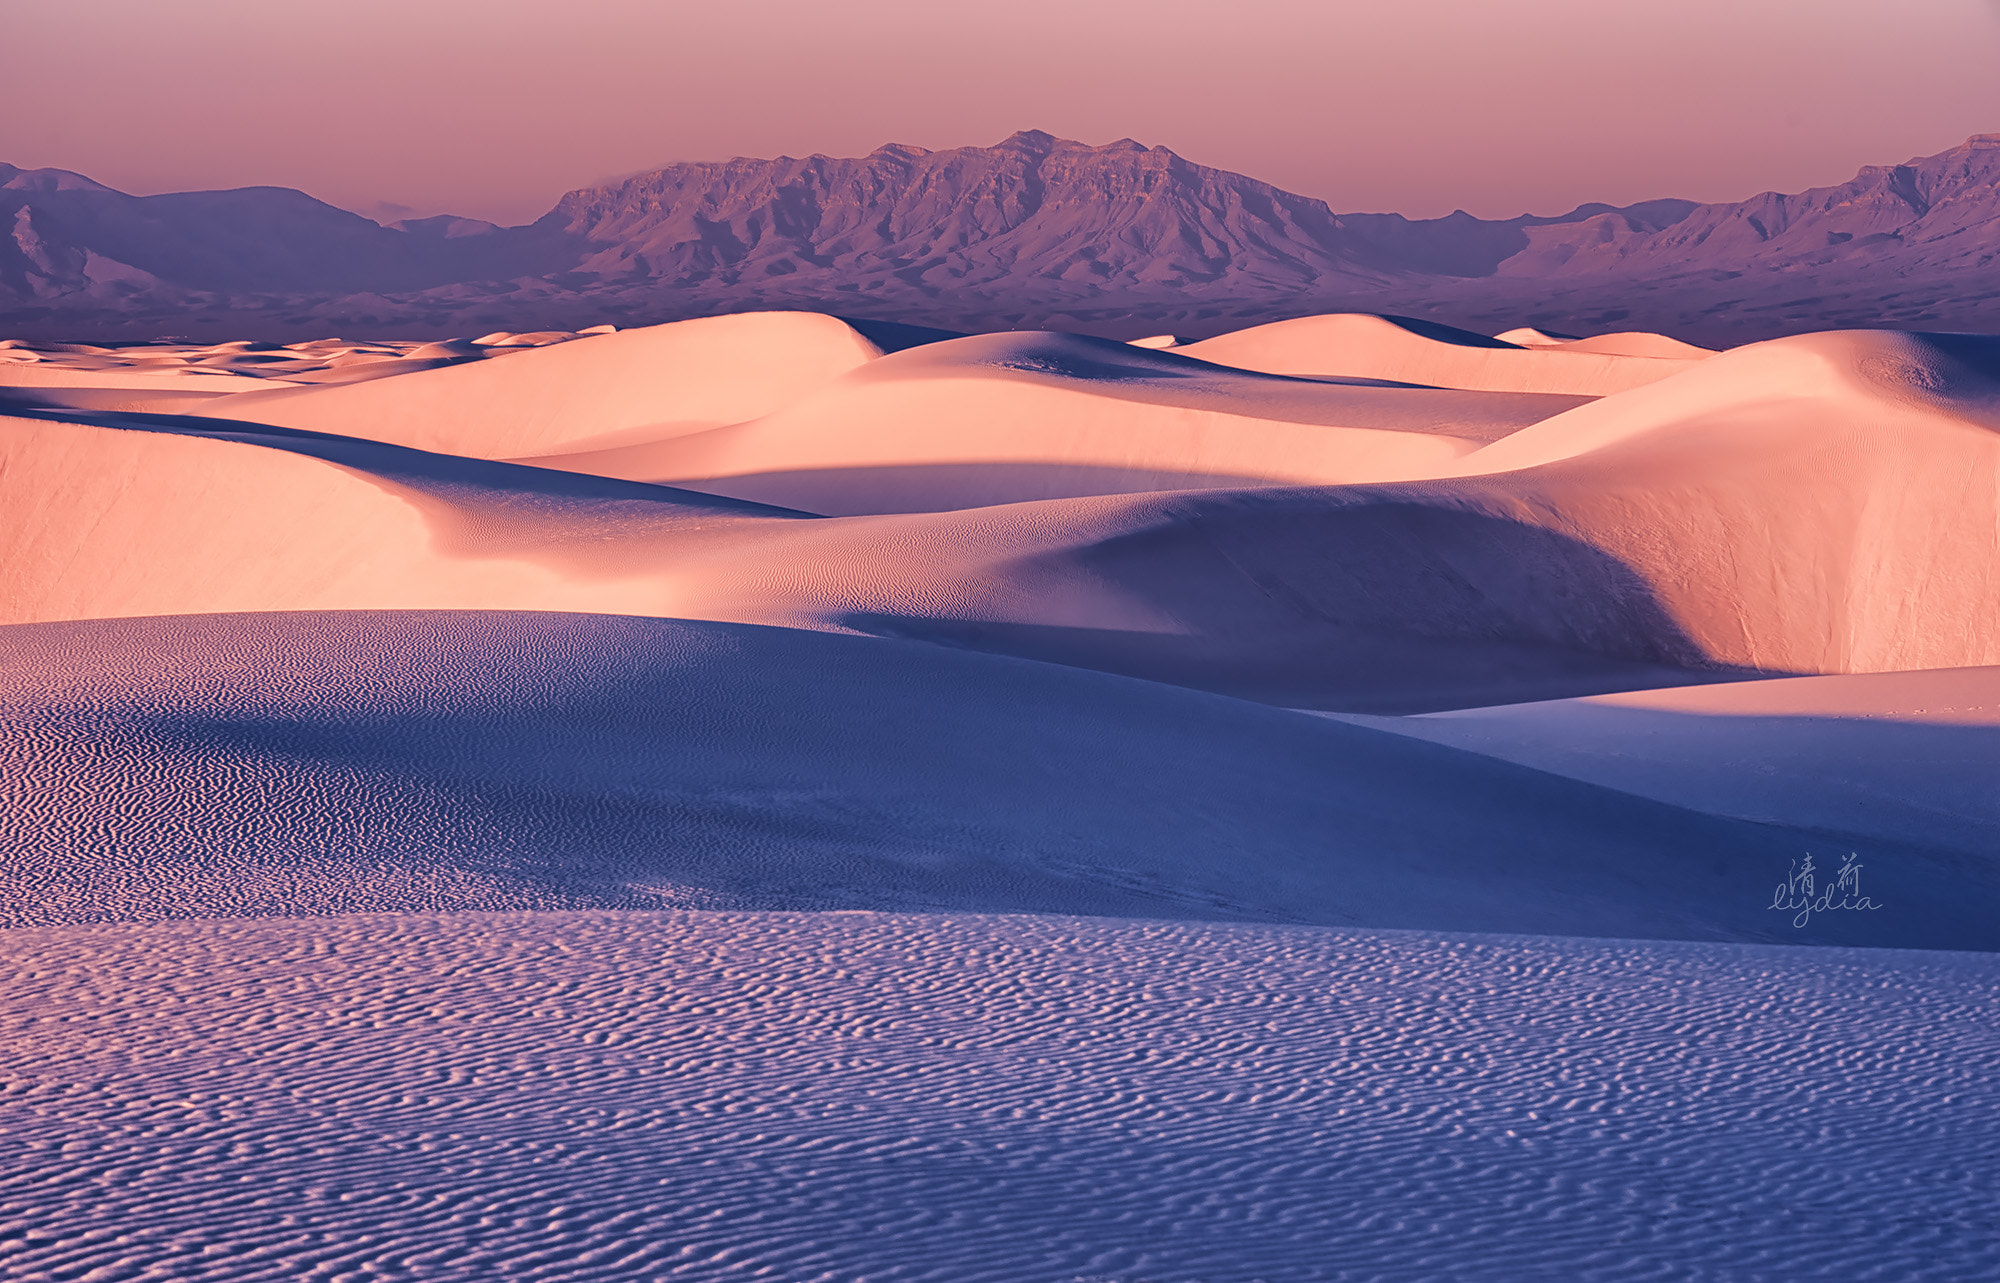 Sony a7 II sample photo. Sunrise at white sands national monument photography